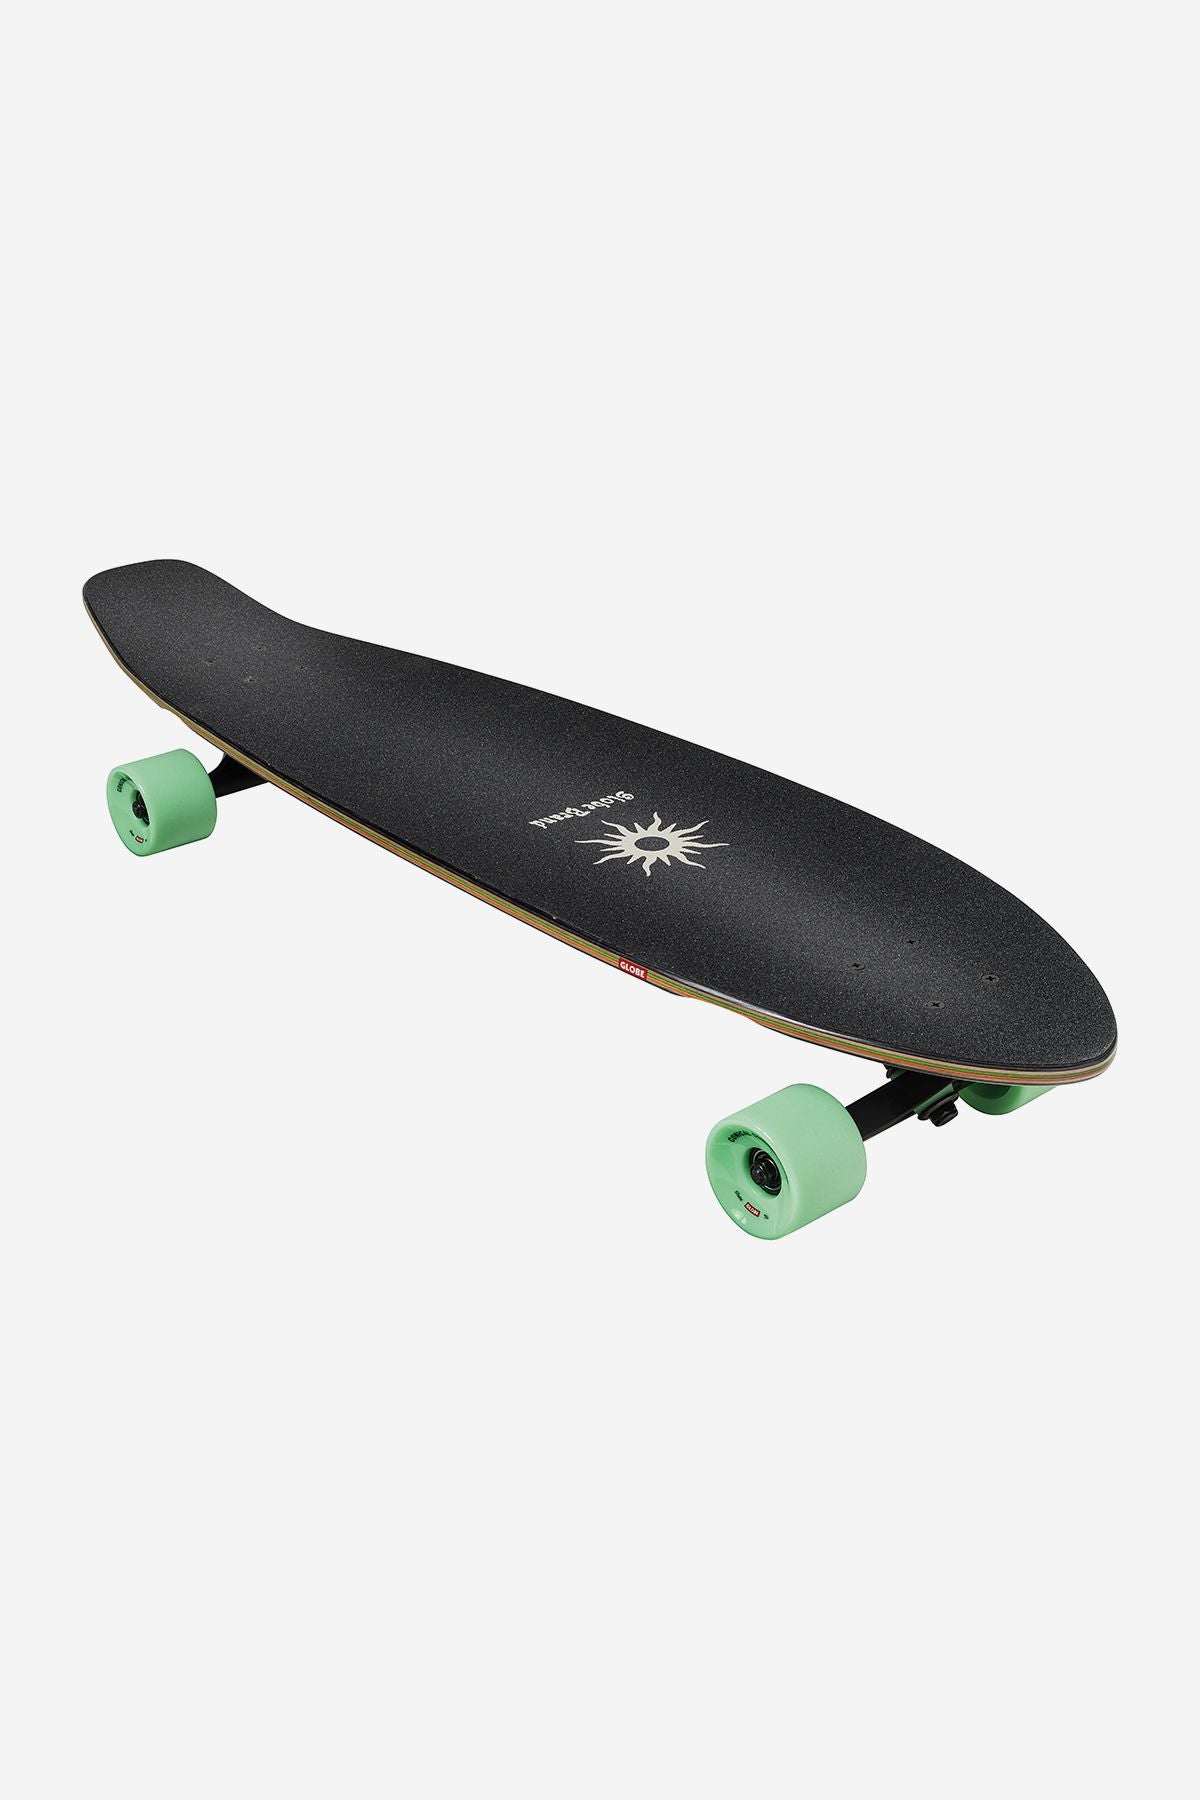 Front angled of The All-Time 35" Longboard